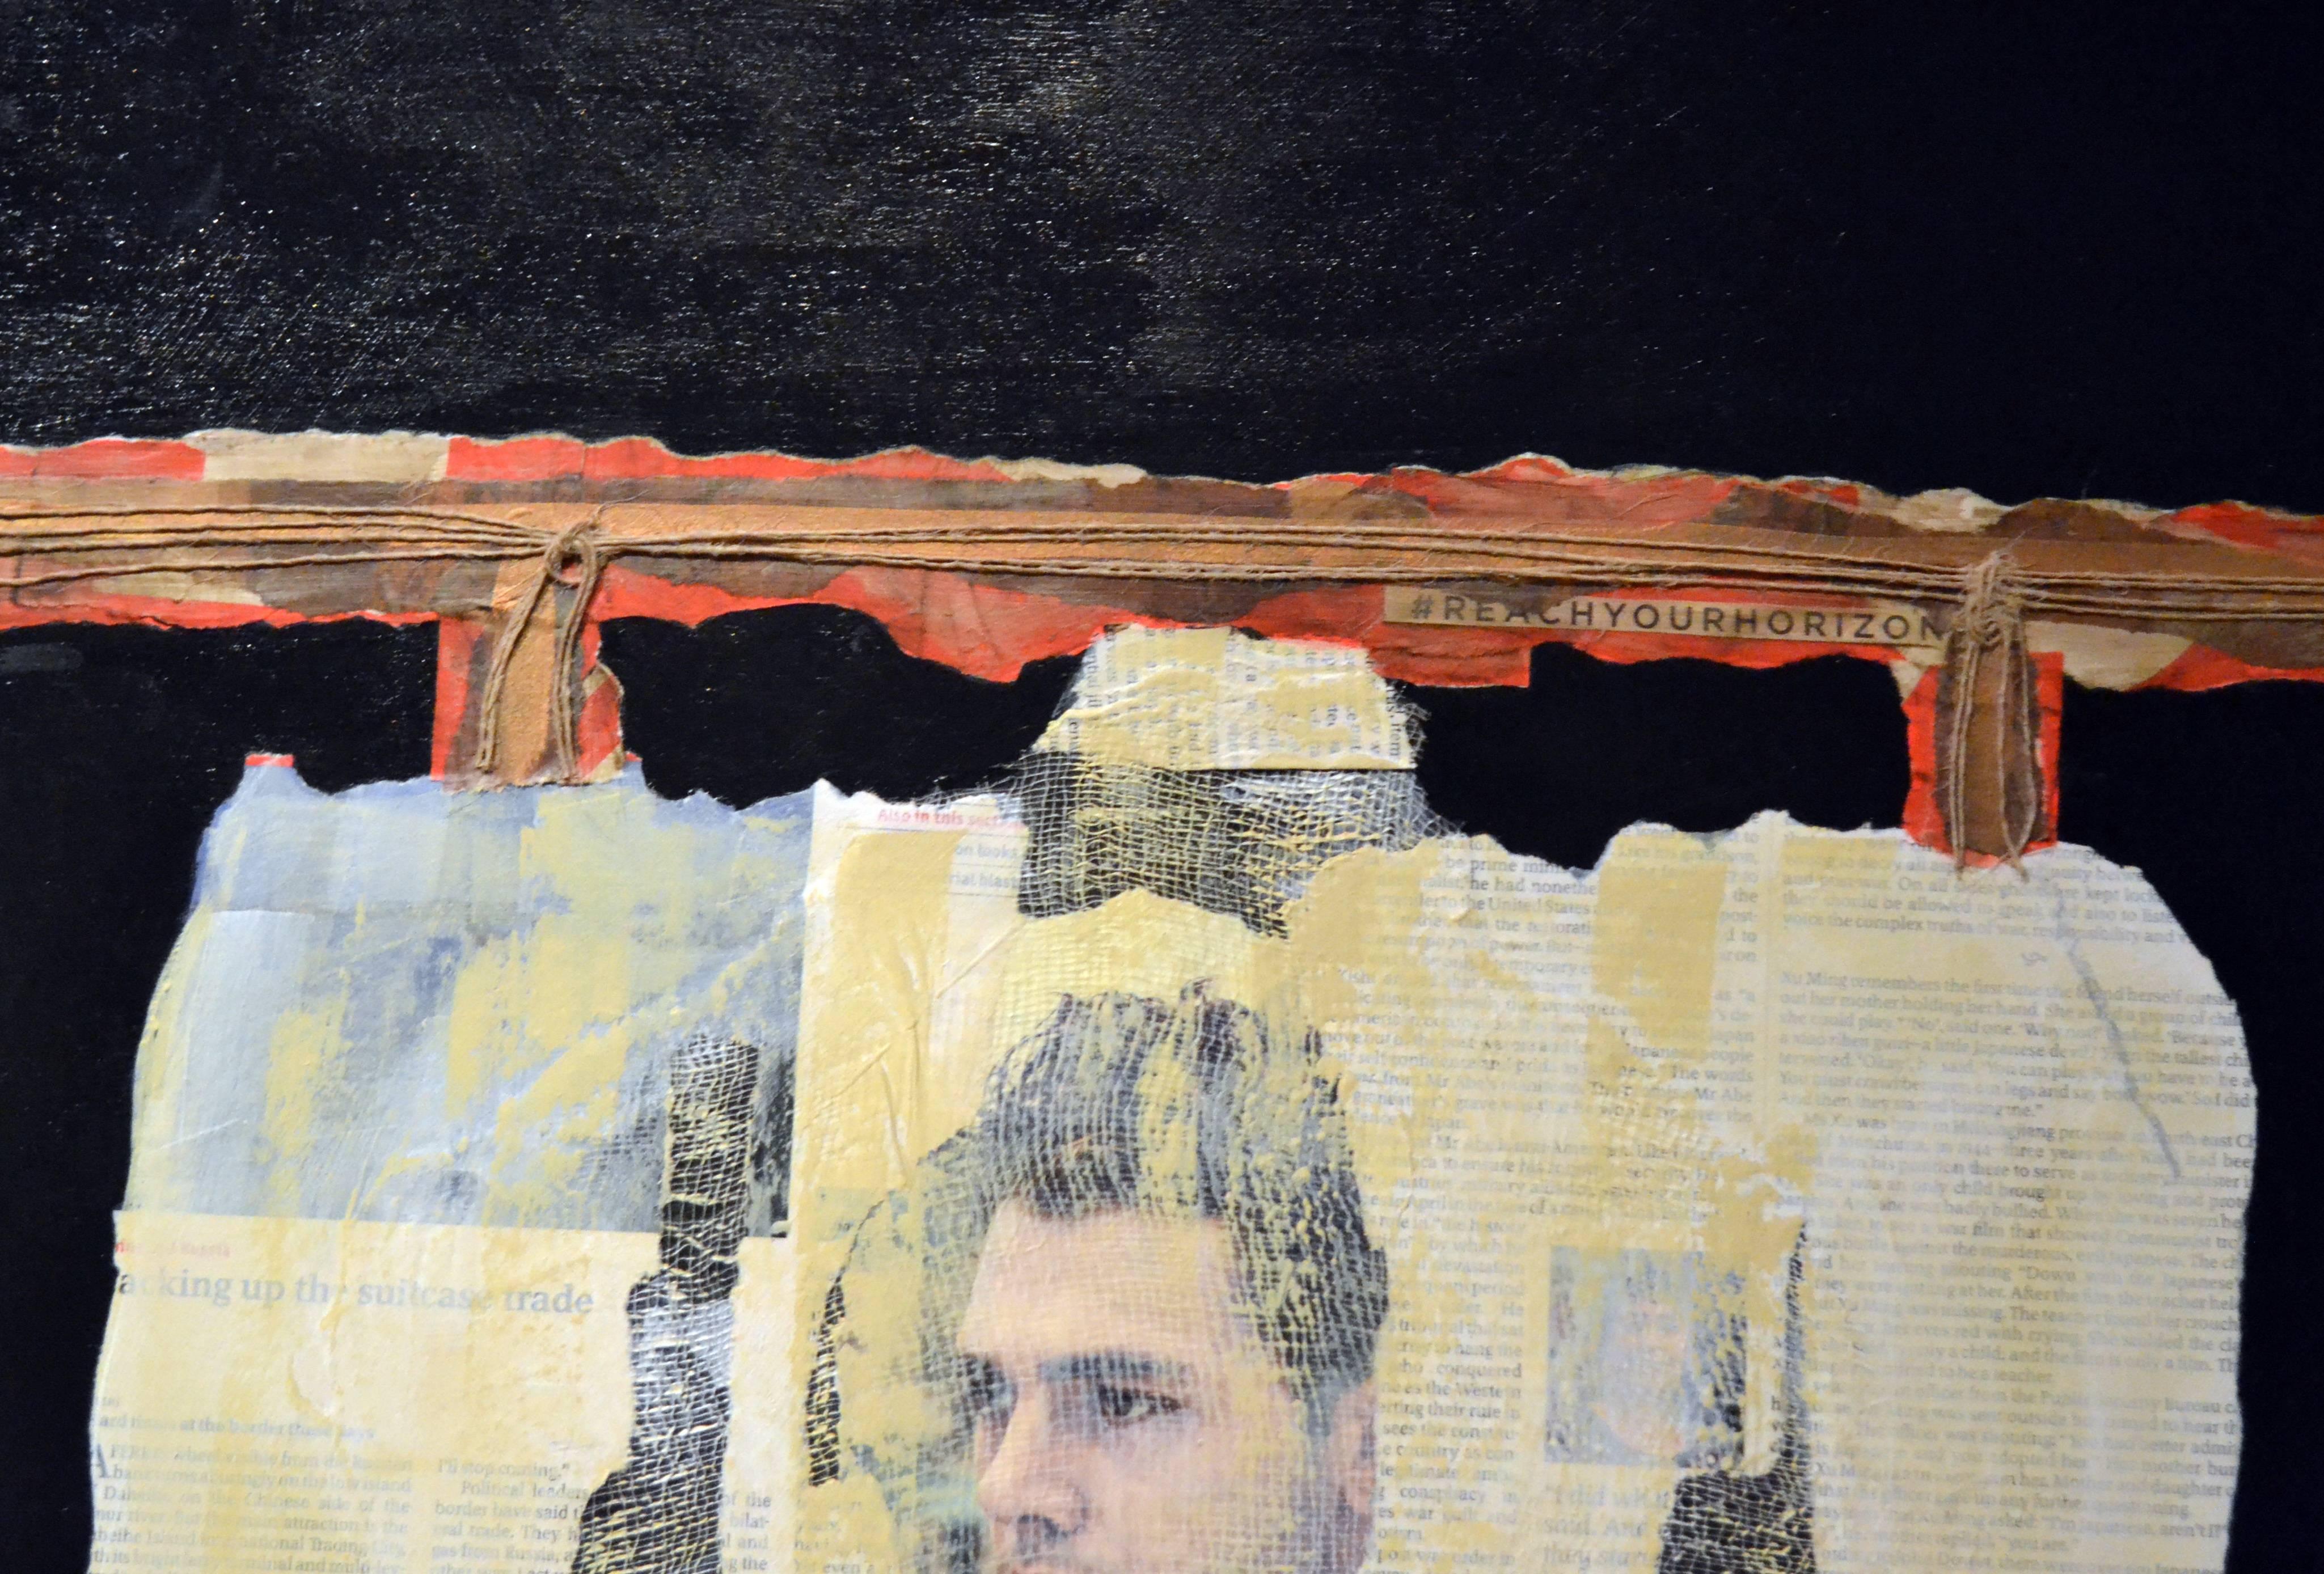 Artist Jane Evans is greatly inspired by natural forms and the deconstruction of organic and architectural elements. This abstract mixed-media collage on board titled Artist no 53 with young man's face is one of six in a series painted on wooden box